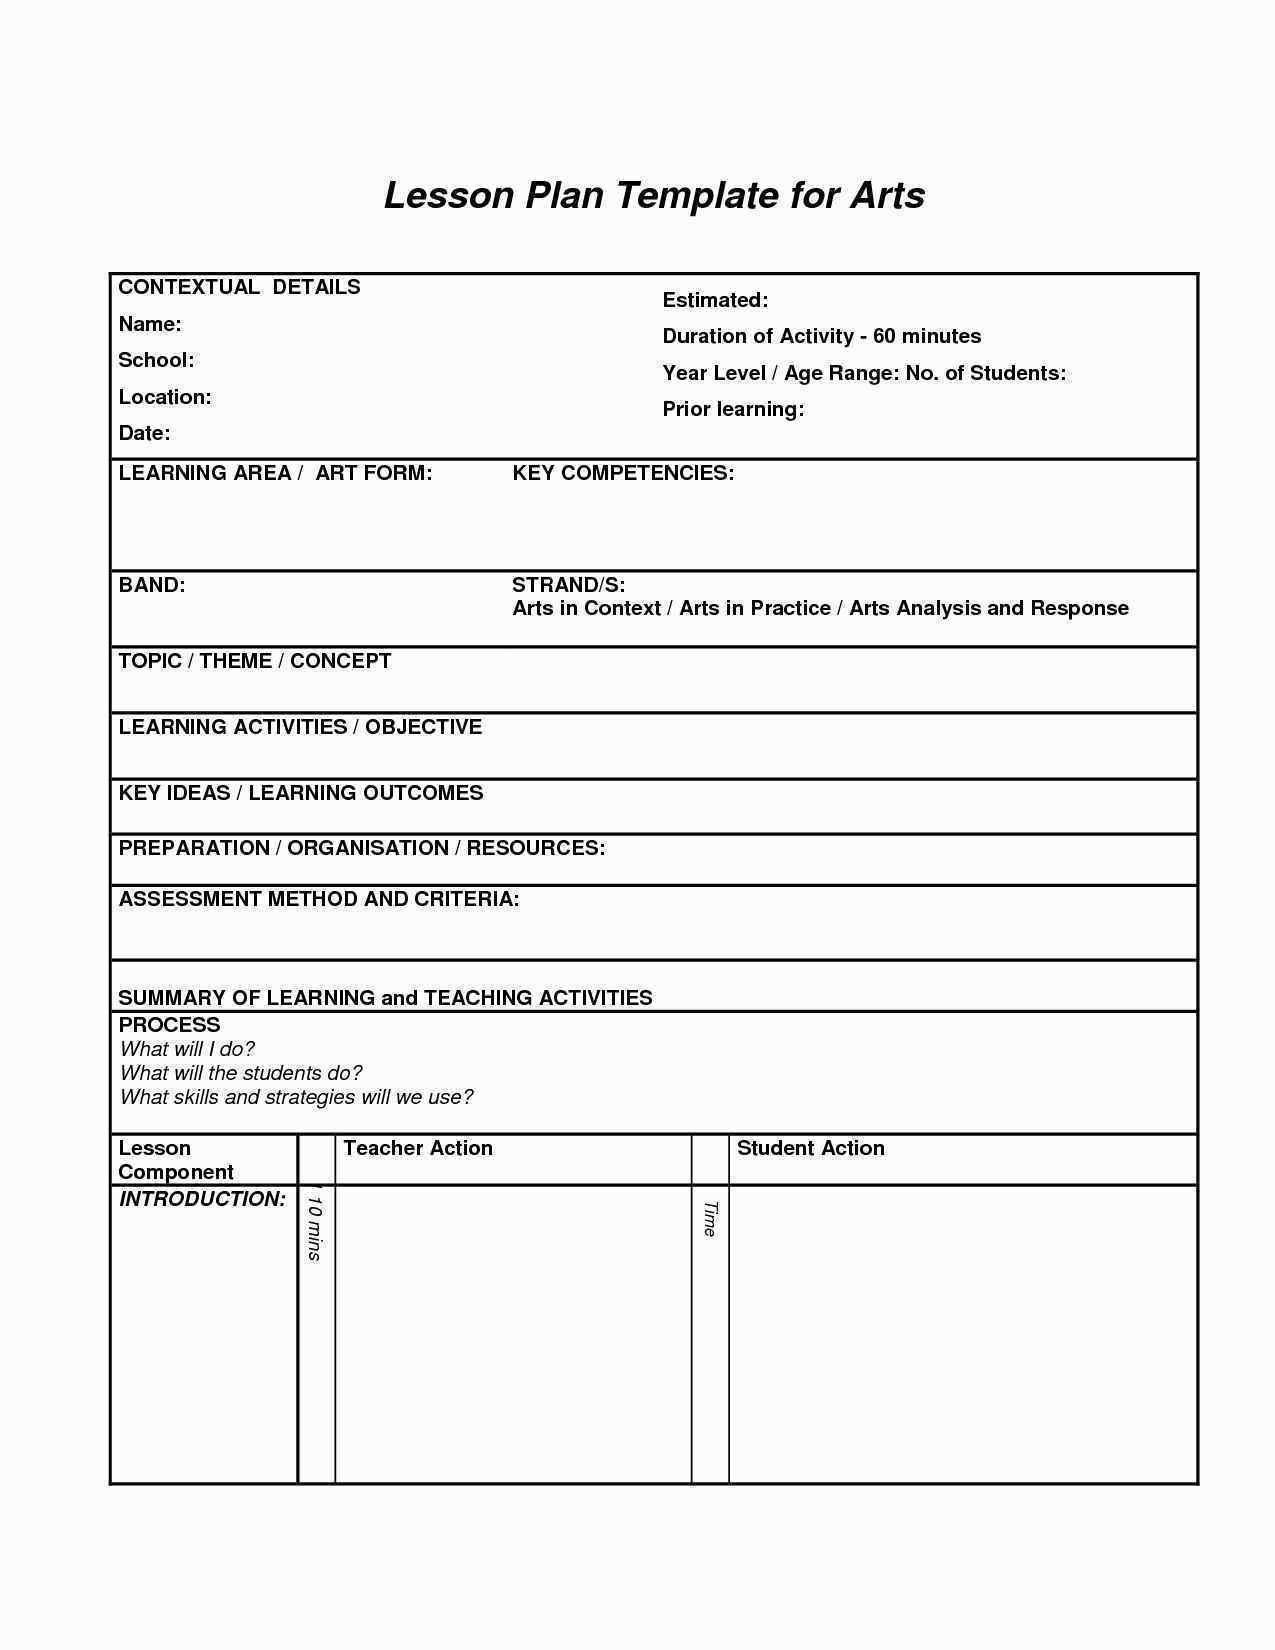 Sunday School Lesson Plans 12 13 Lesson Plan Template for Adults Lascazuelasphilly